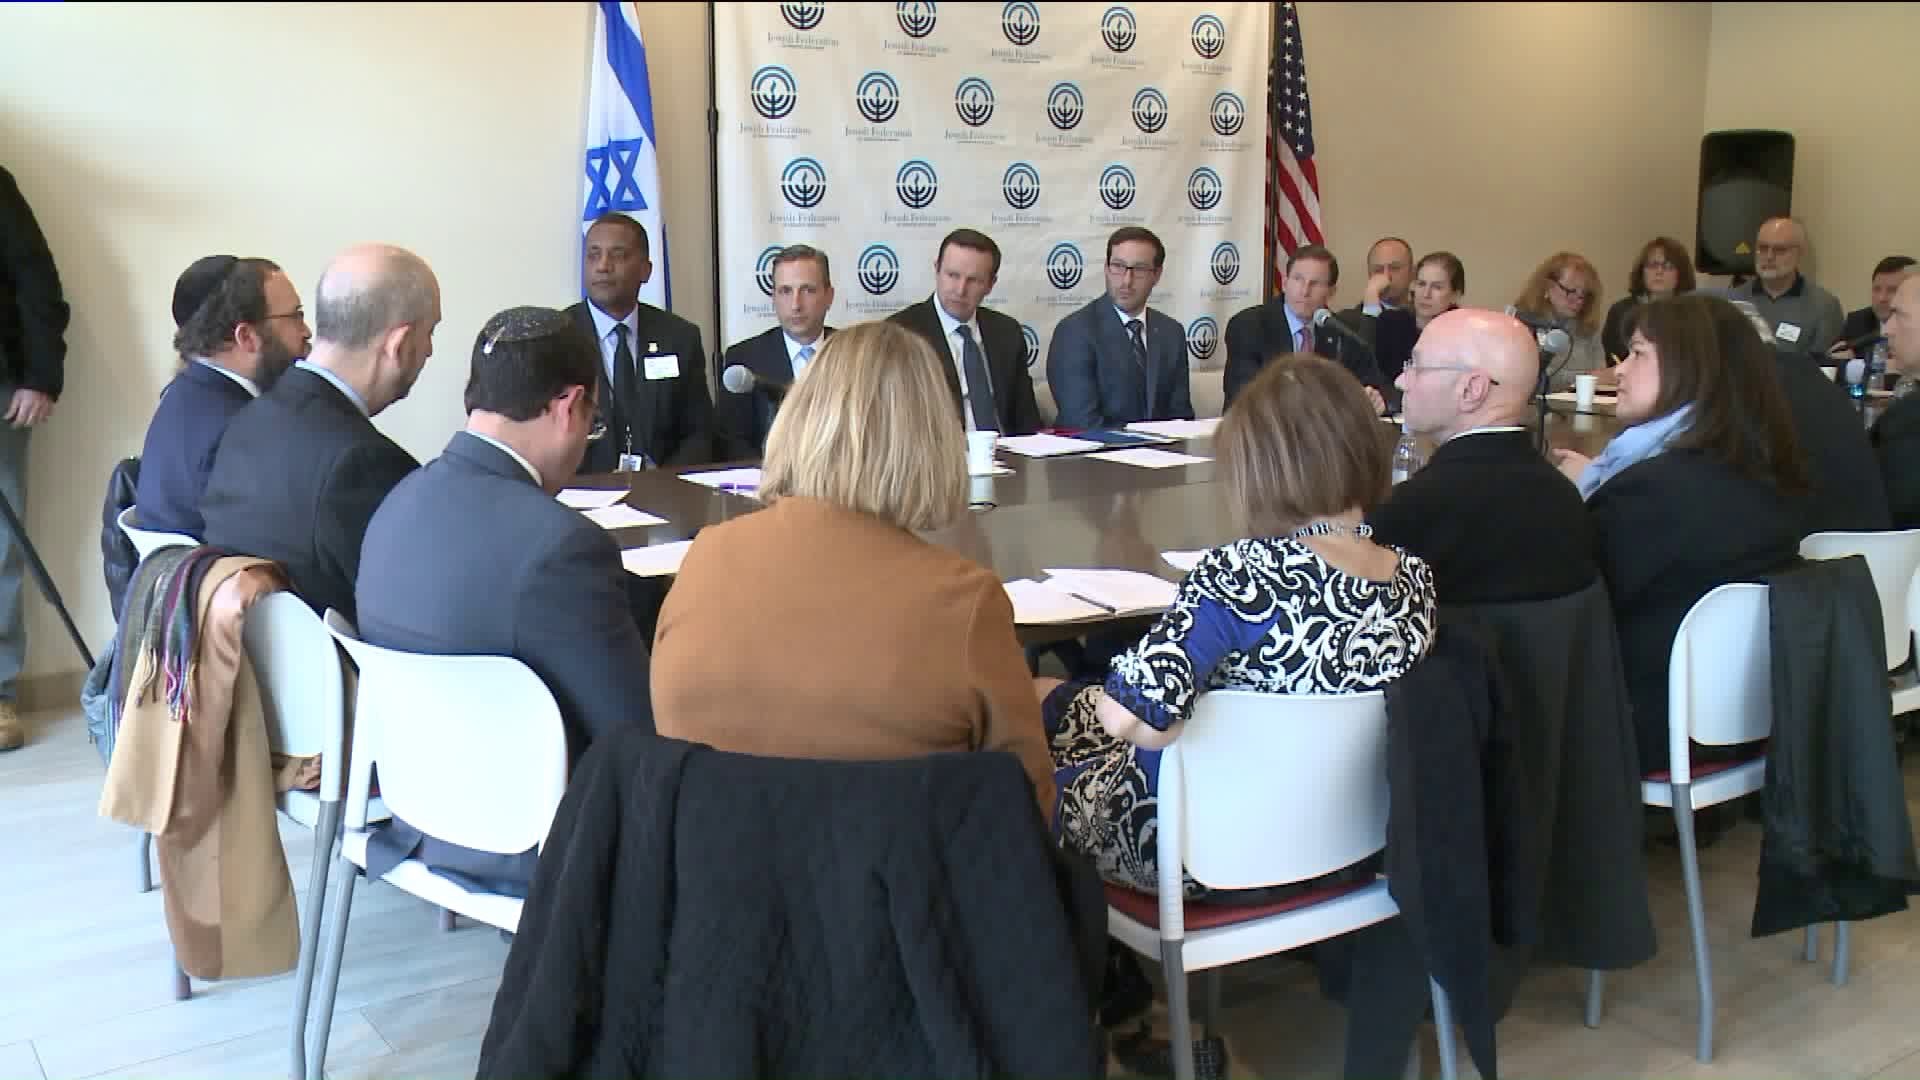 Connecticut lawmakers looking to increase security at places of worship